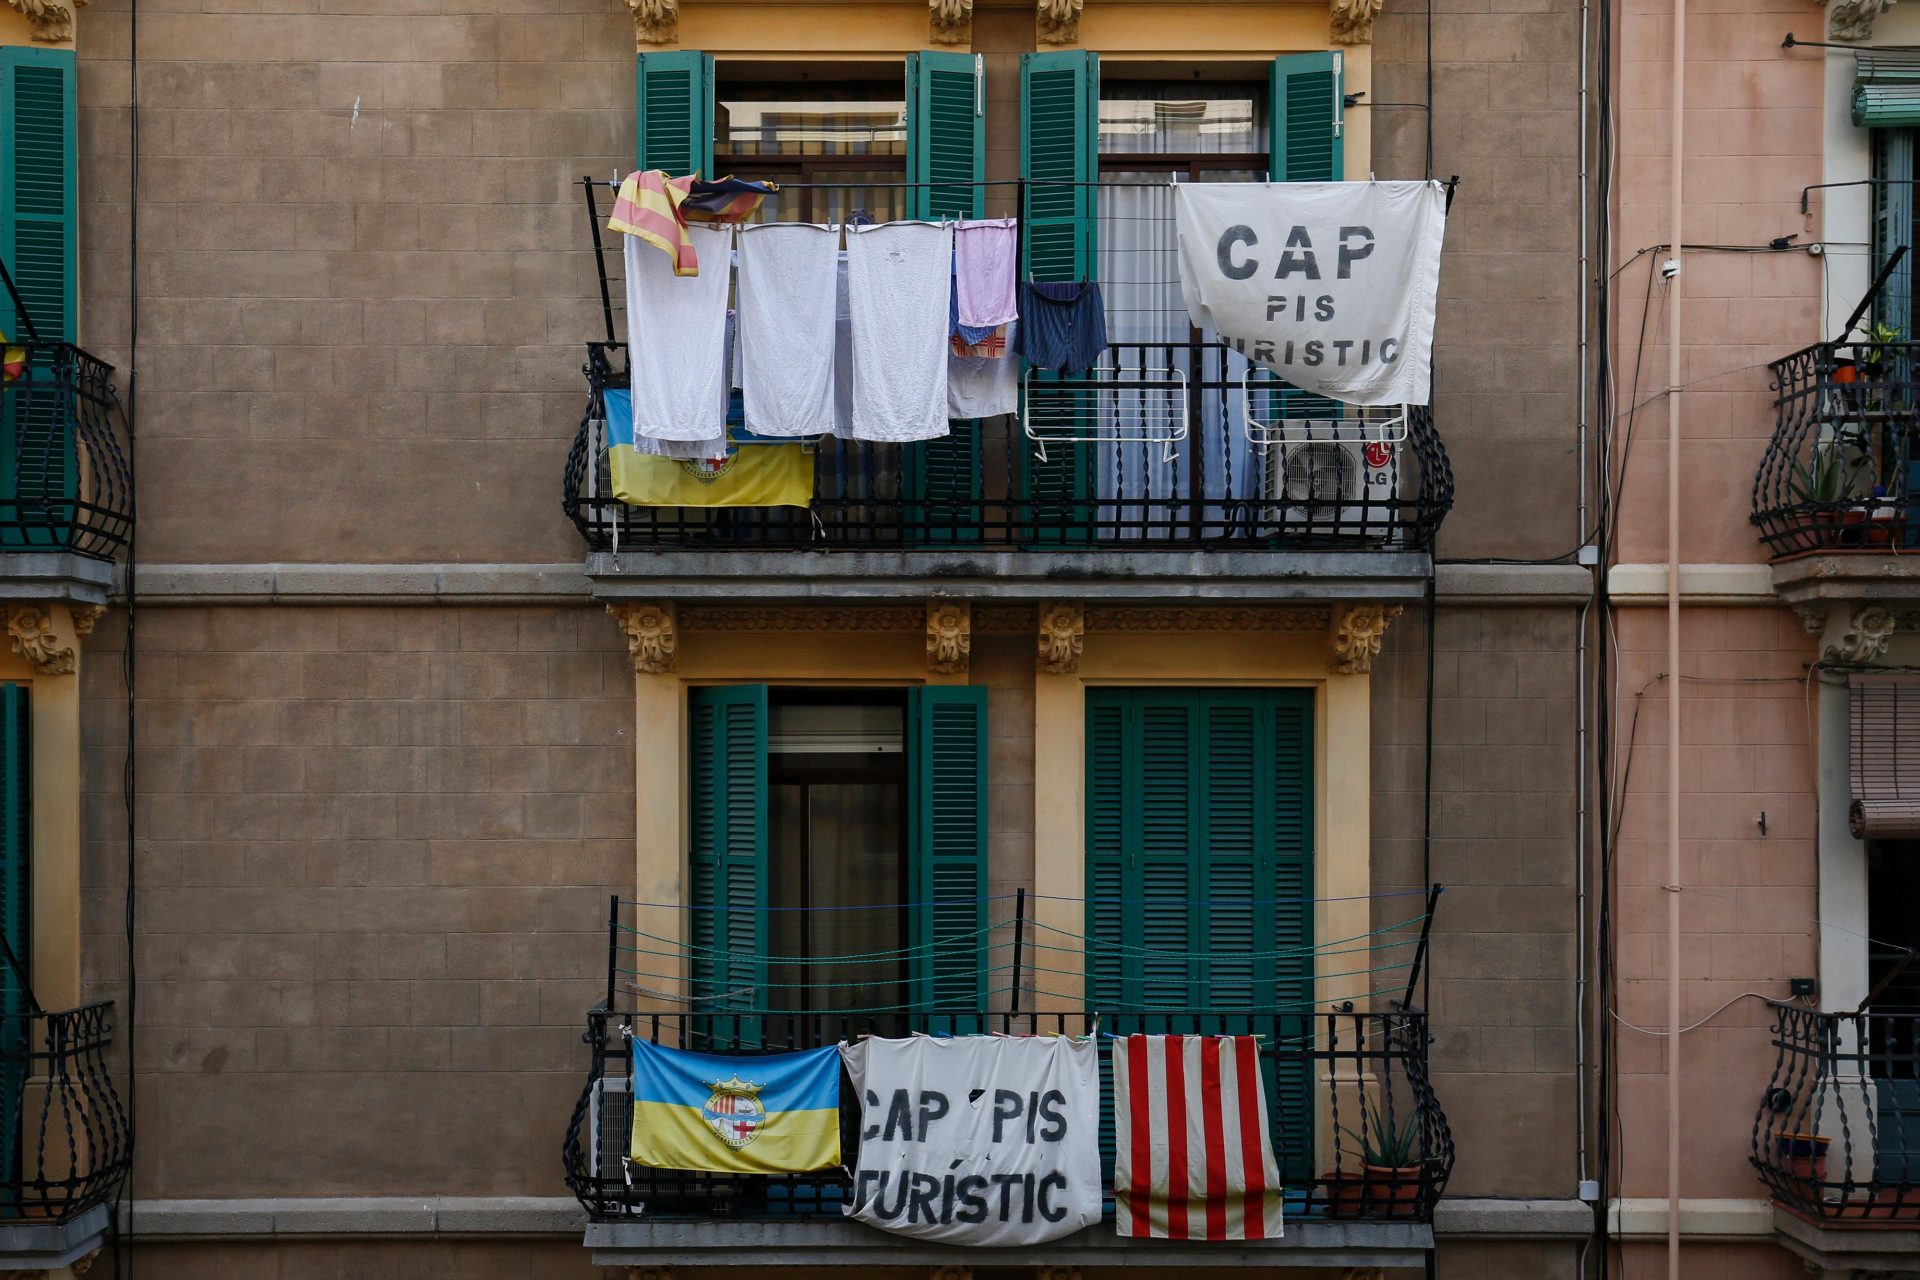 Banners reading “No tourist flats” hang from a balcony to protest against holiday rental apartments for tourists in the Barcelona suburb of Barceloneta. Photo: PAU BARRENA/AFP via Getty